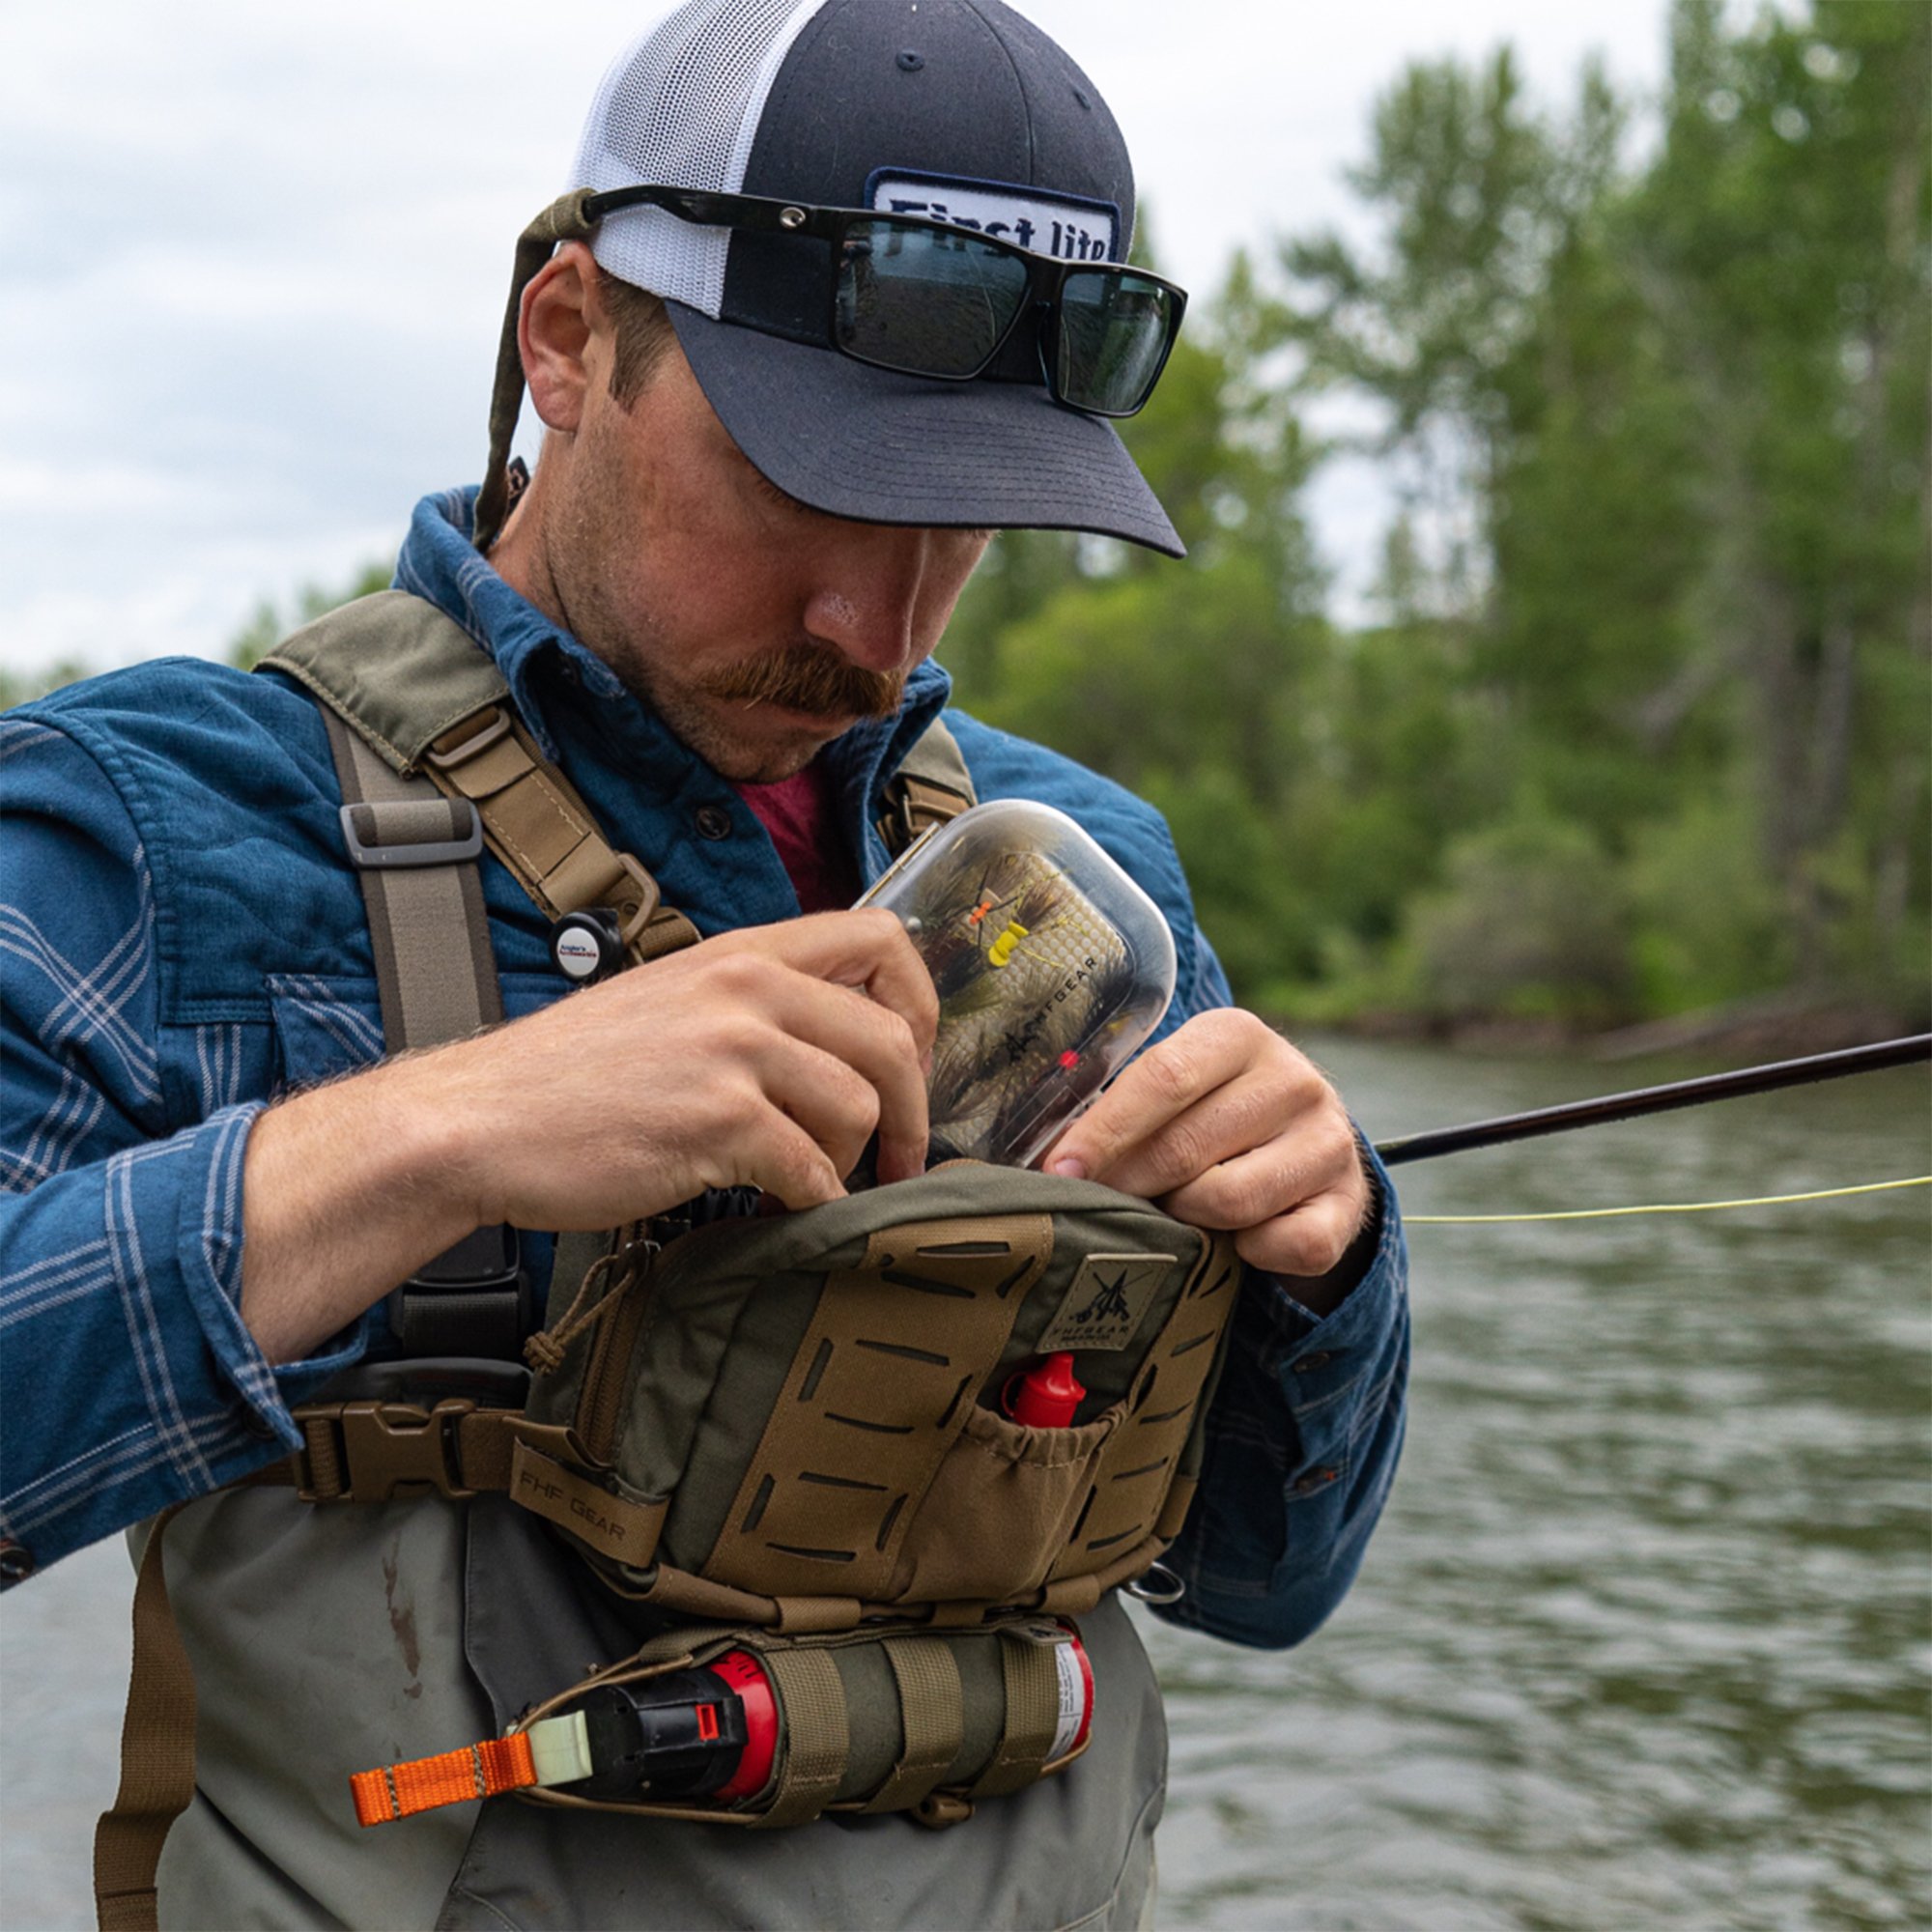 FHF Gear Fishing Kit in Coyote Brown | 500D Cordura